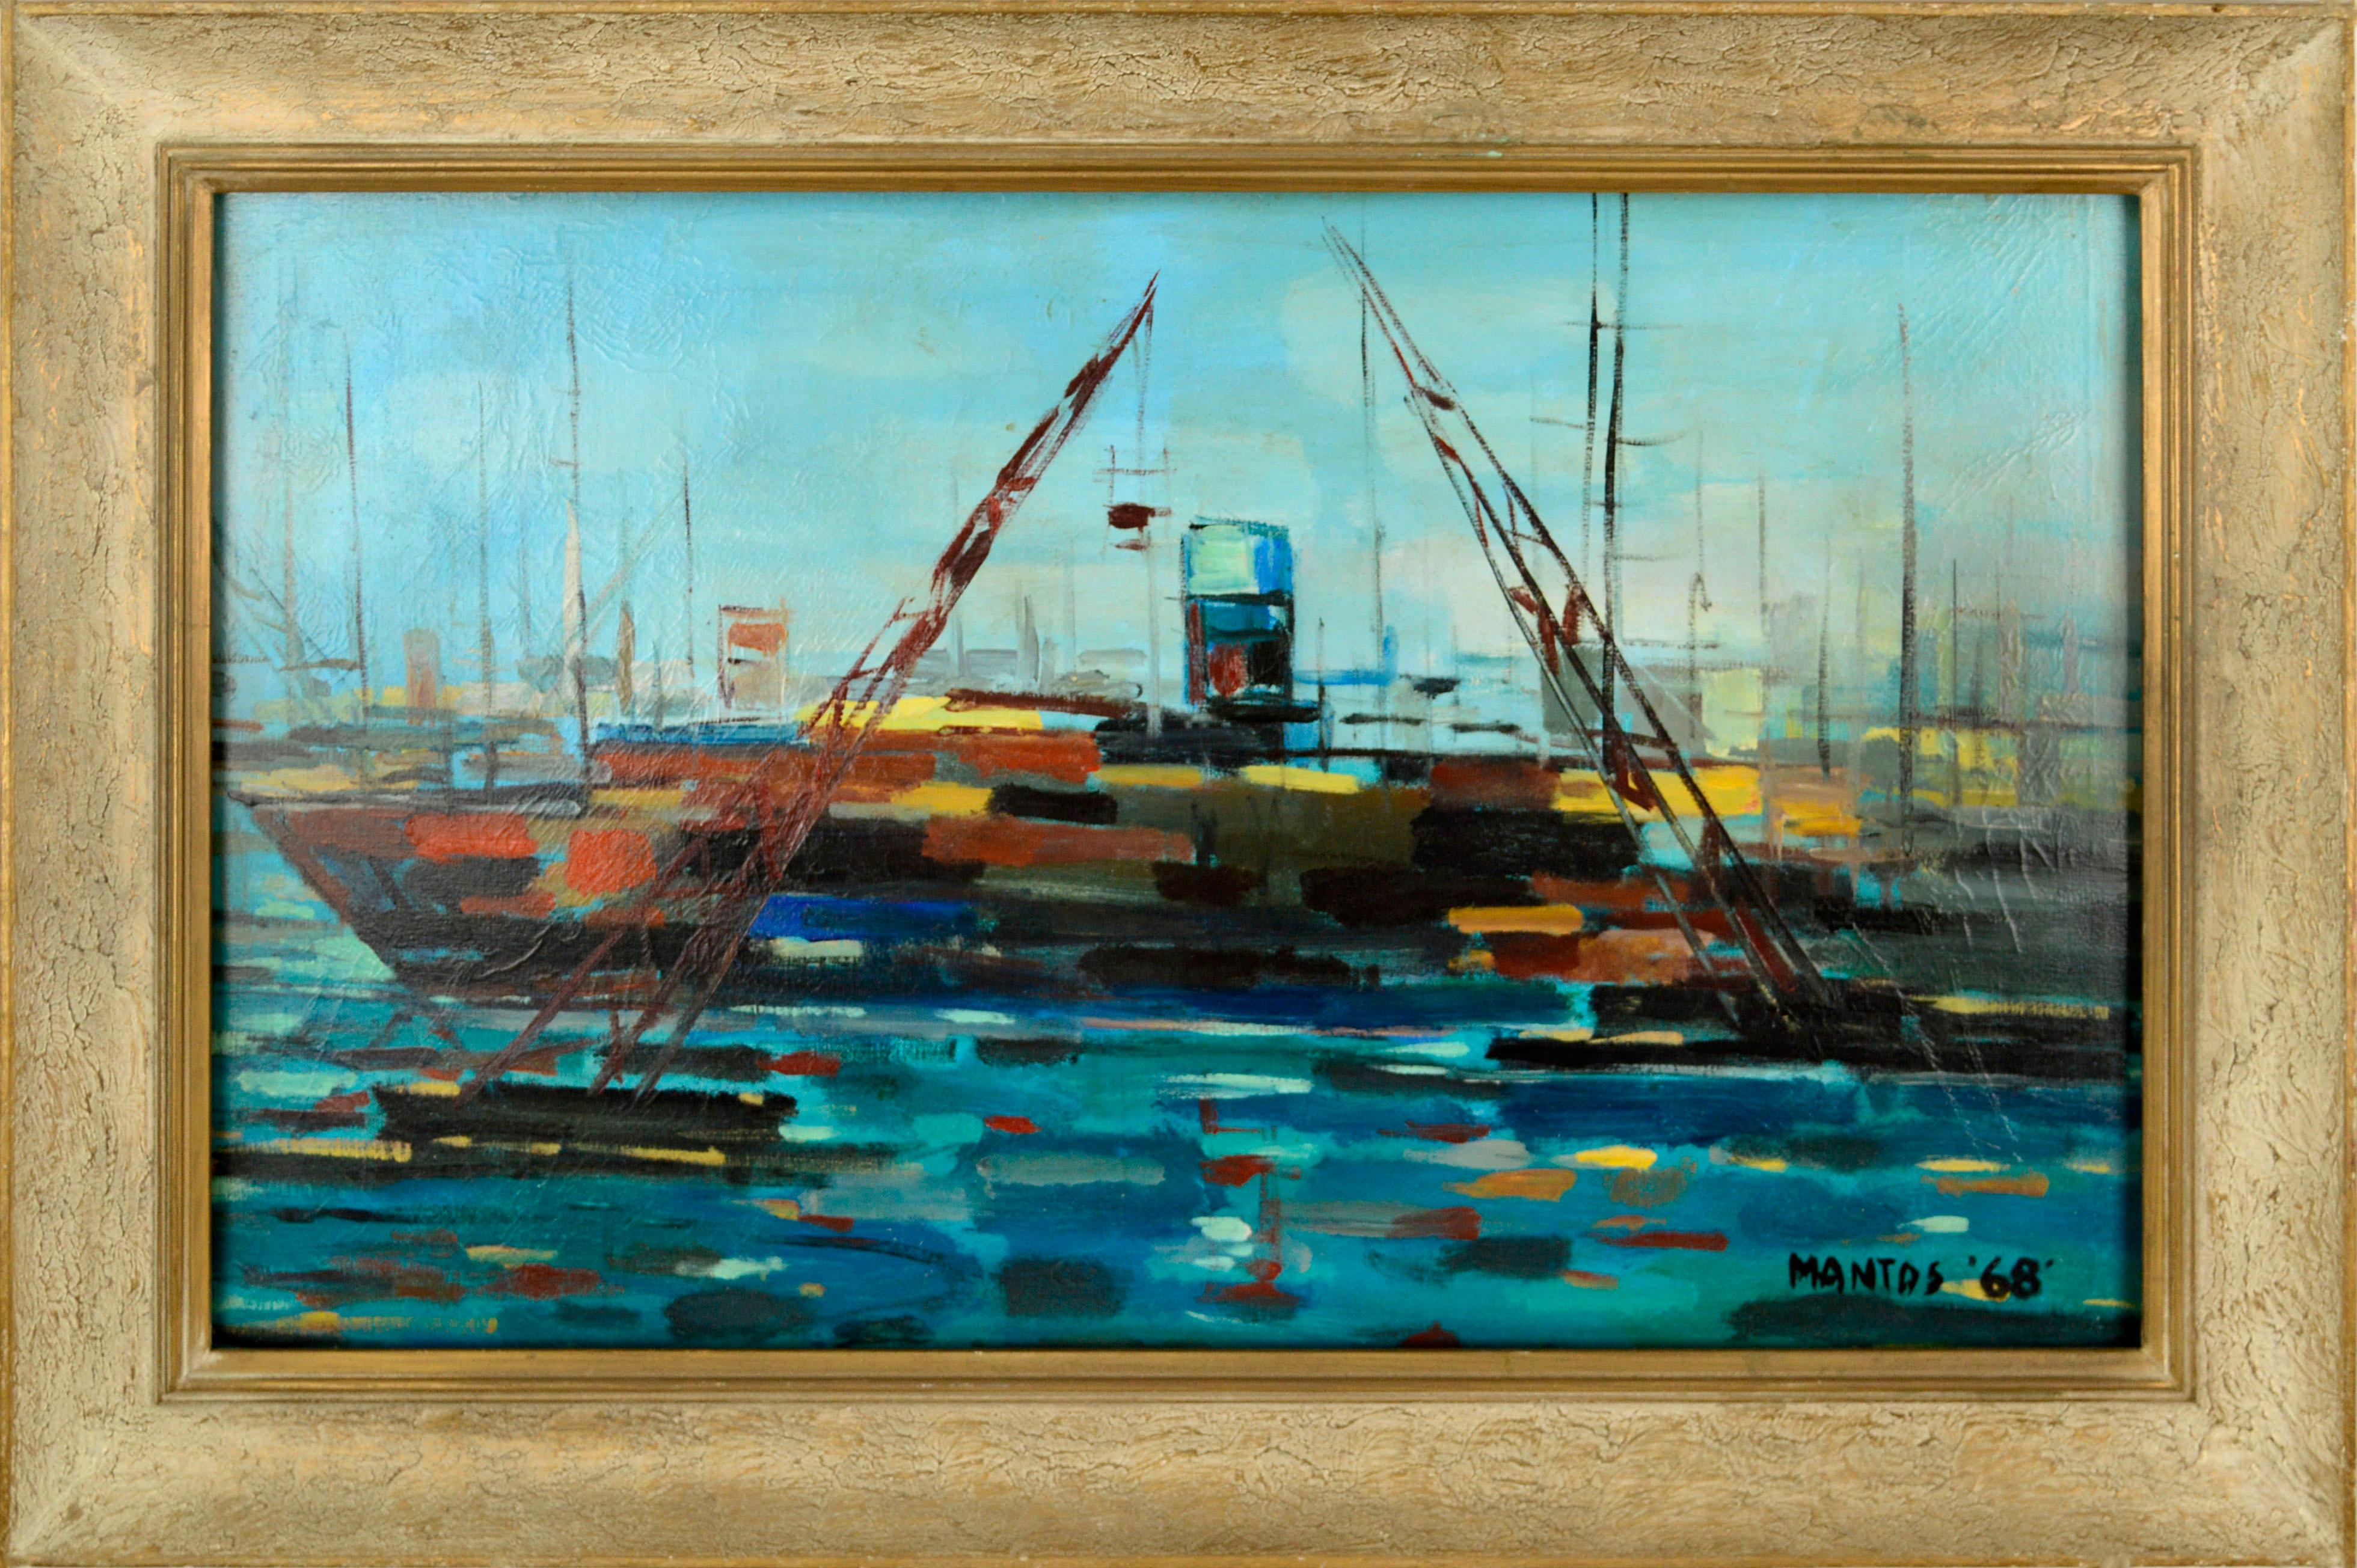 P. Mantos Landscape Painting - Mid Century Modern Abstracted Maritime Seascape with Boats 